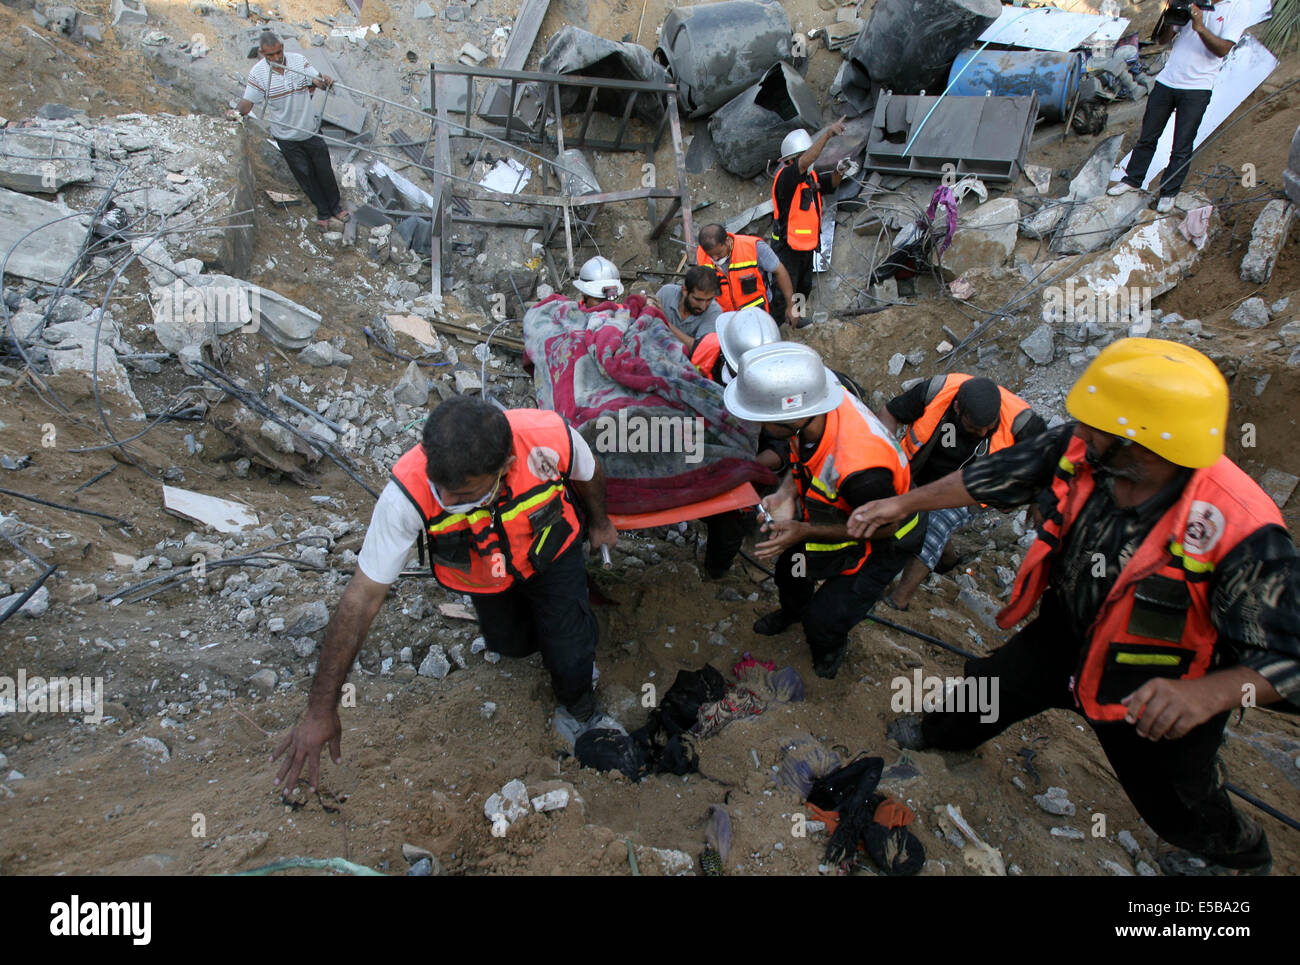 Khan Younis, Khan Younis, Palestinian Territory. 26th July, 2014. Palestinian rescue workers use an excavator to remove a dead body after what witnesses said was an Israeli air strike on the al-Najar family house in Khan Younis in the southern Gaza Strip July 26, 2014. A 12-hour humanitarian truce went into effect on Saturday after Israel and Palestinian militant groups in the Gaza Strip agreed to a U.N. request for a pause in fighting and efforts proceeded to secure a long-term ceasefire moved ahead. Stock Photo